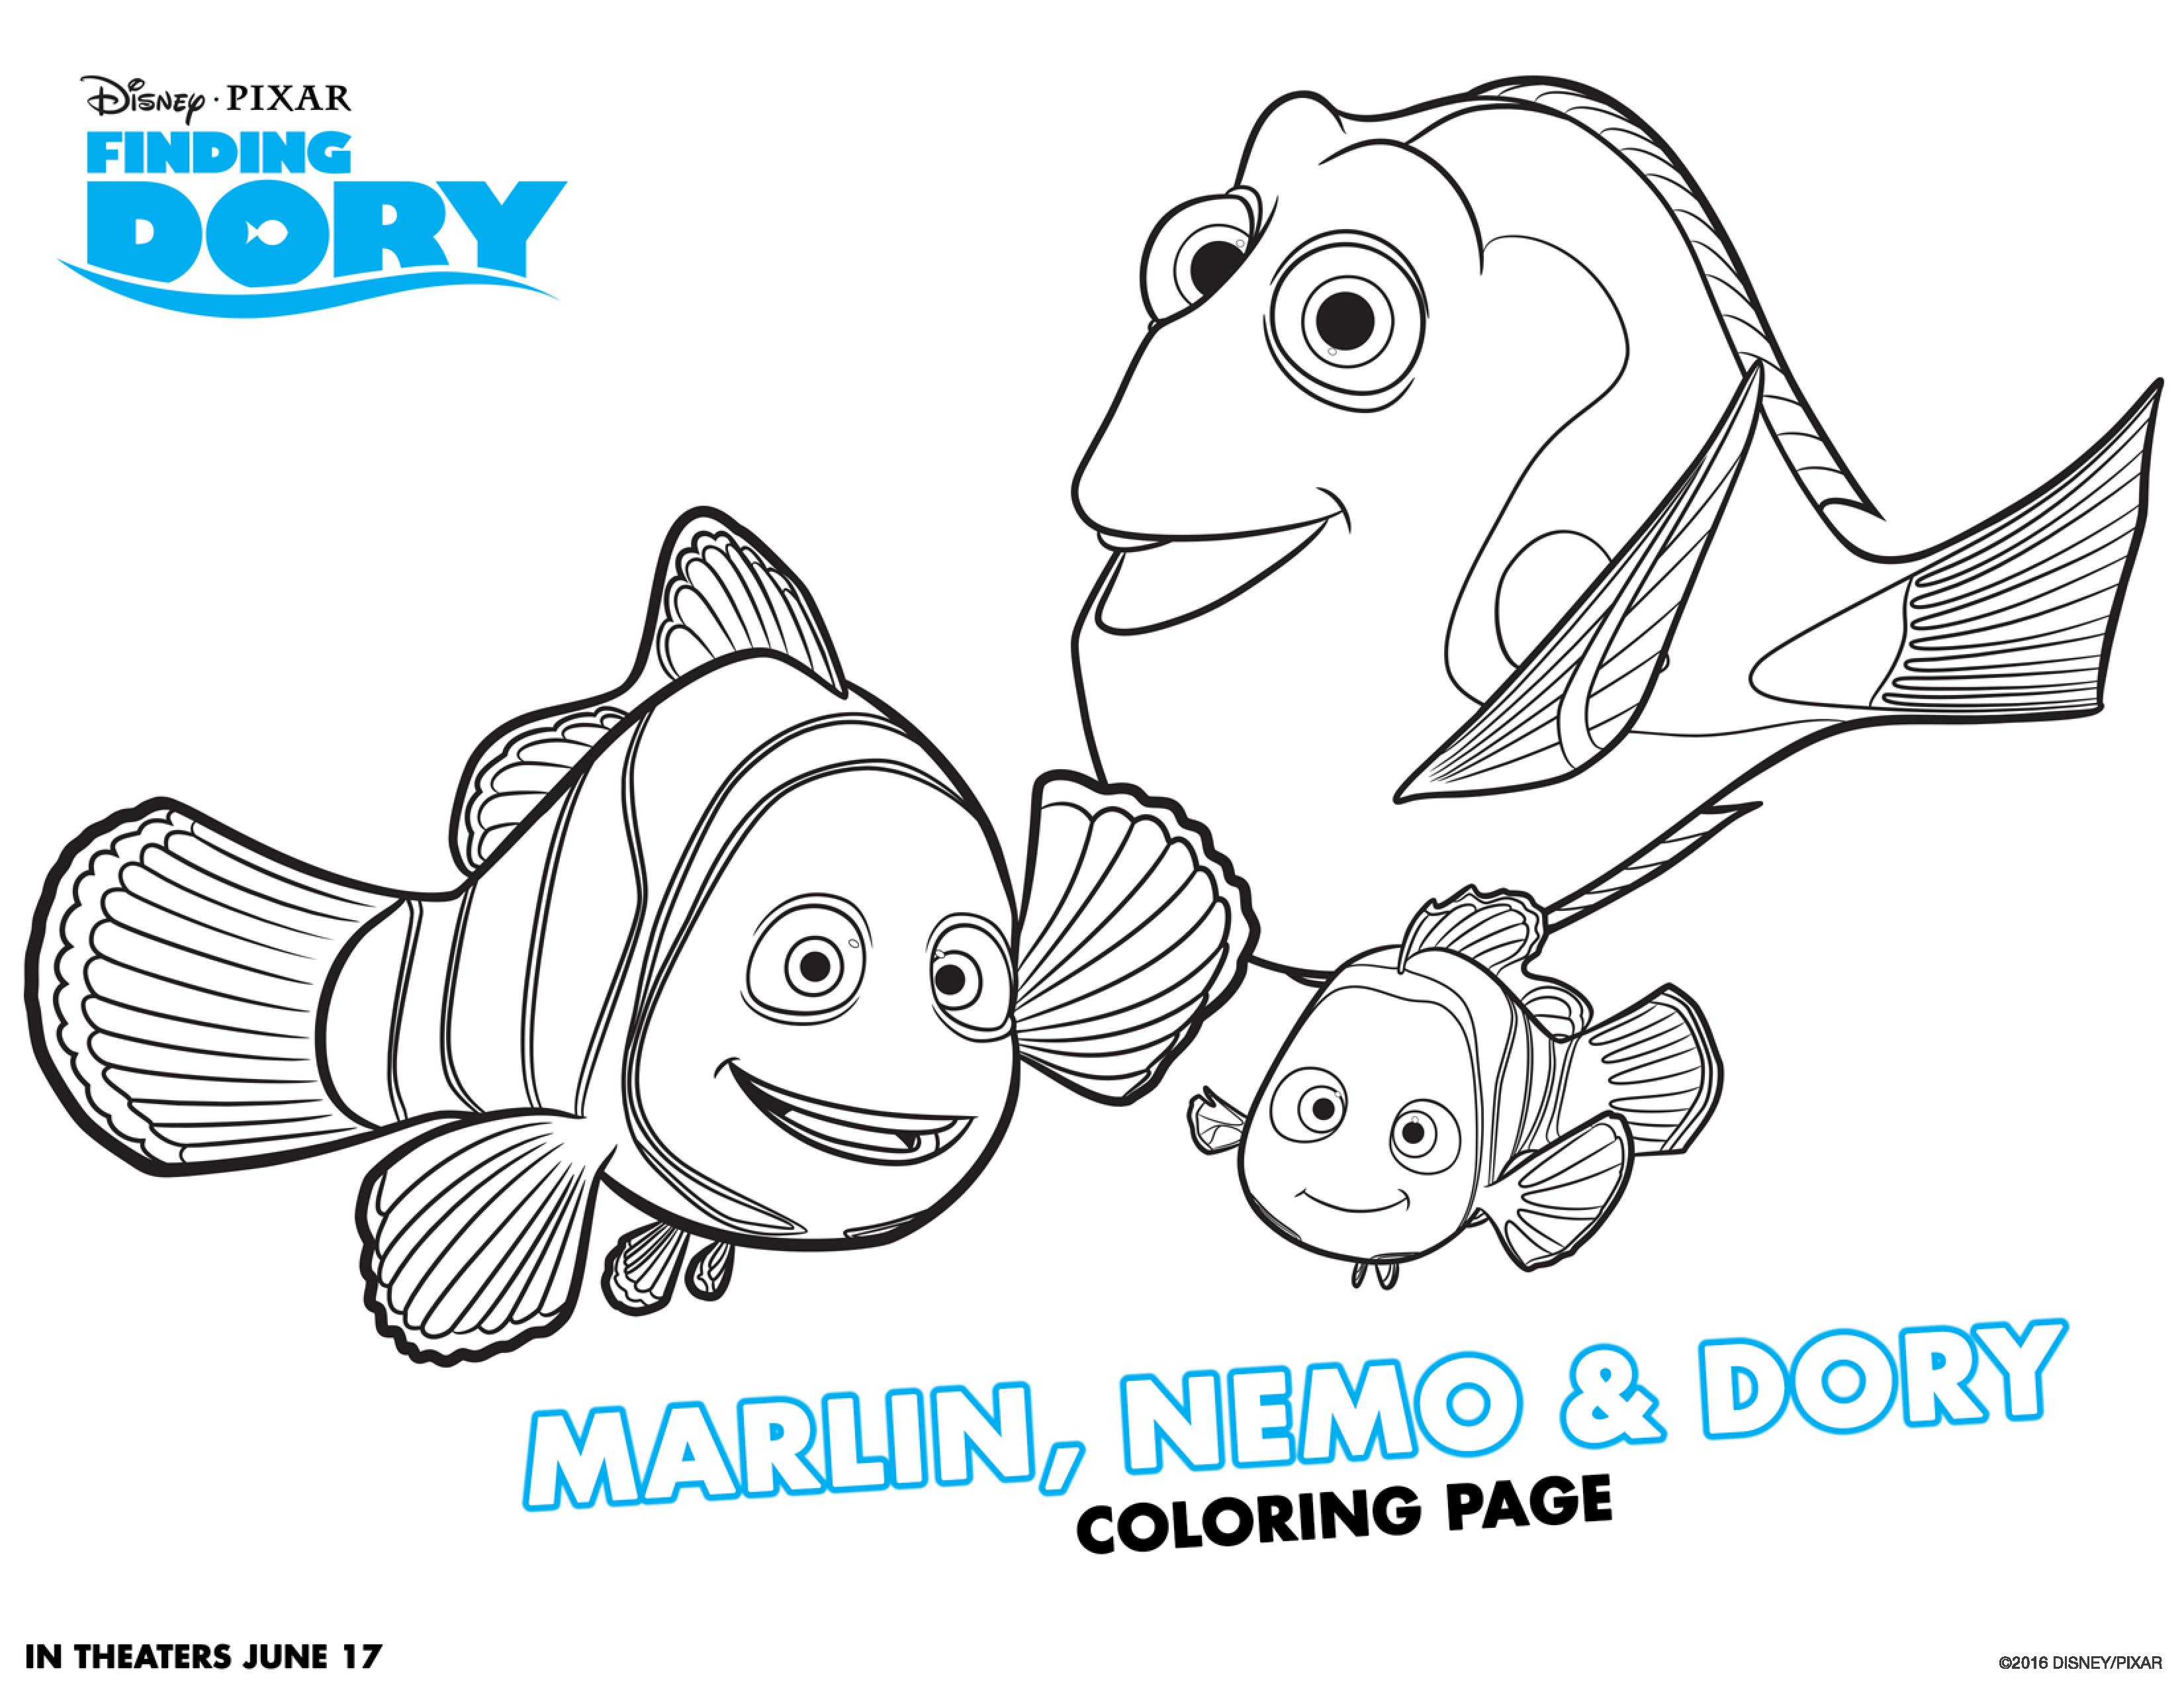 Marlin Neemo and Dory Coloring Page